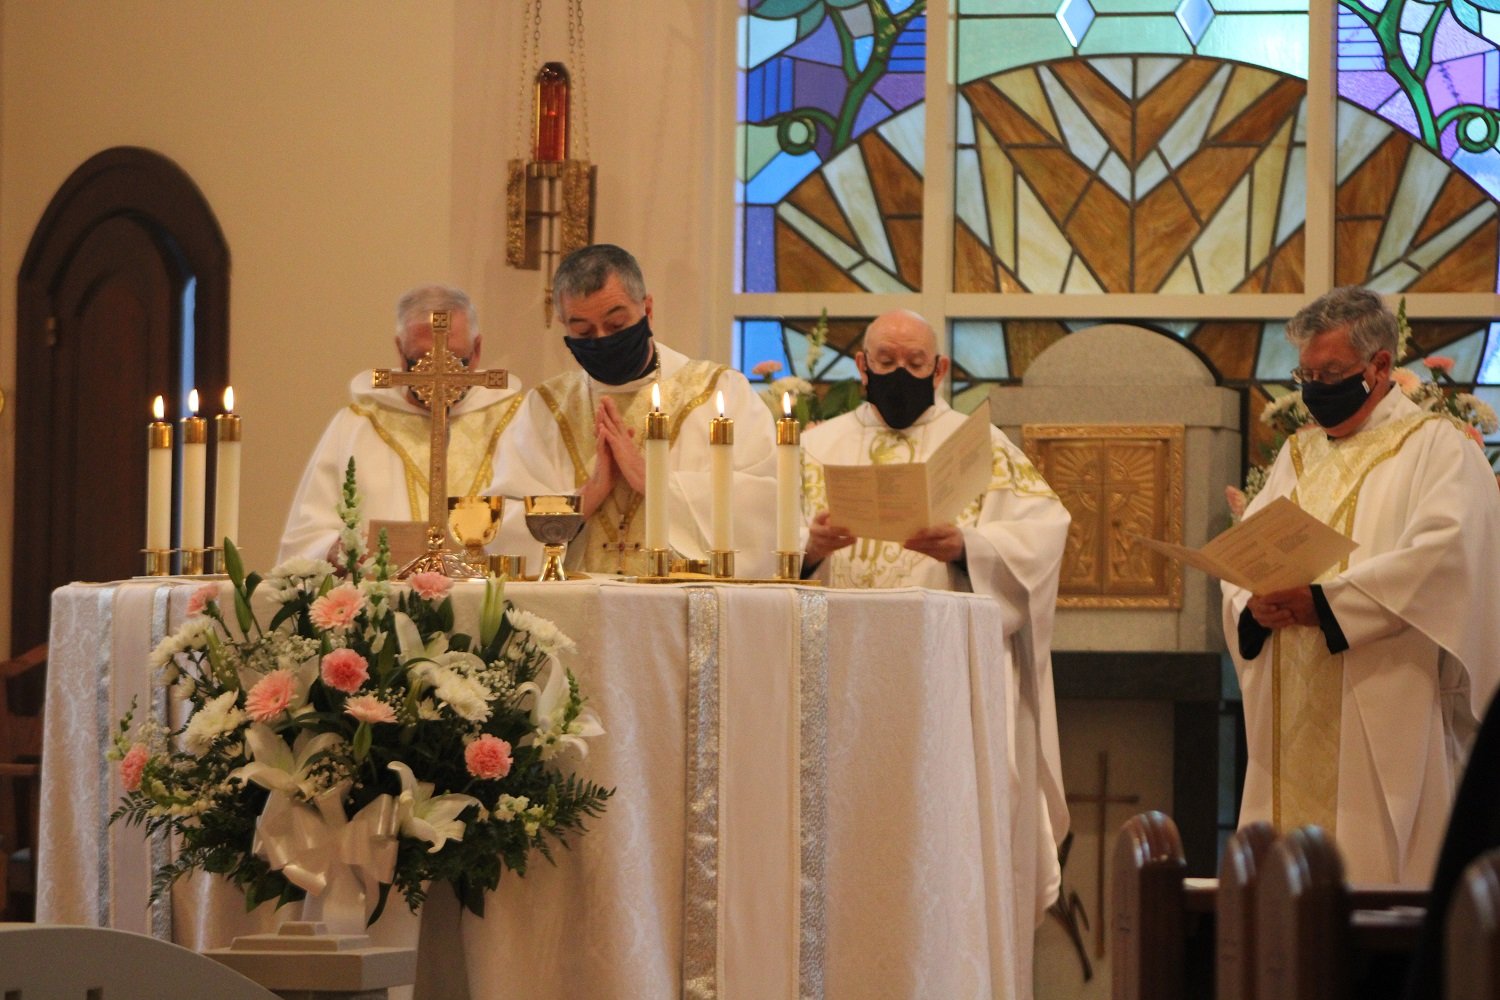  We were delighted to have Bishop Medley here to celebrate the Eucharist for Sr. Miriam Esther’s Profession! 